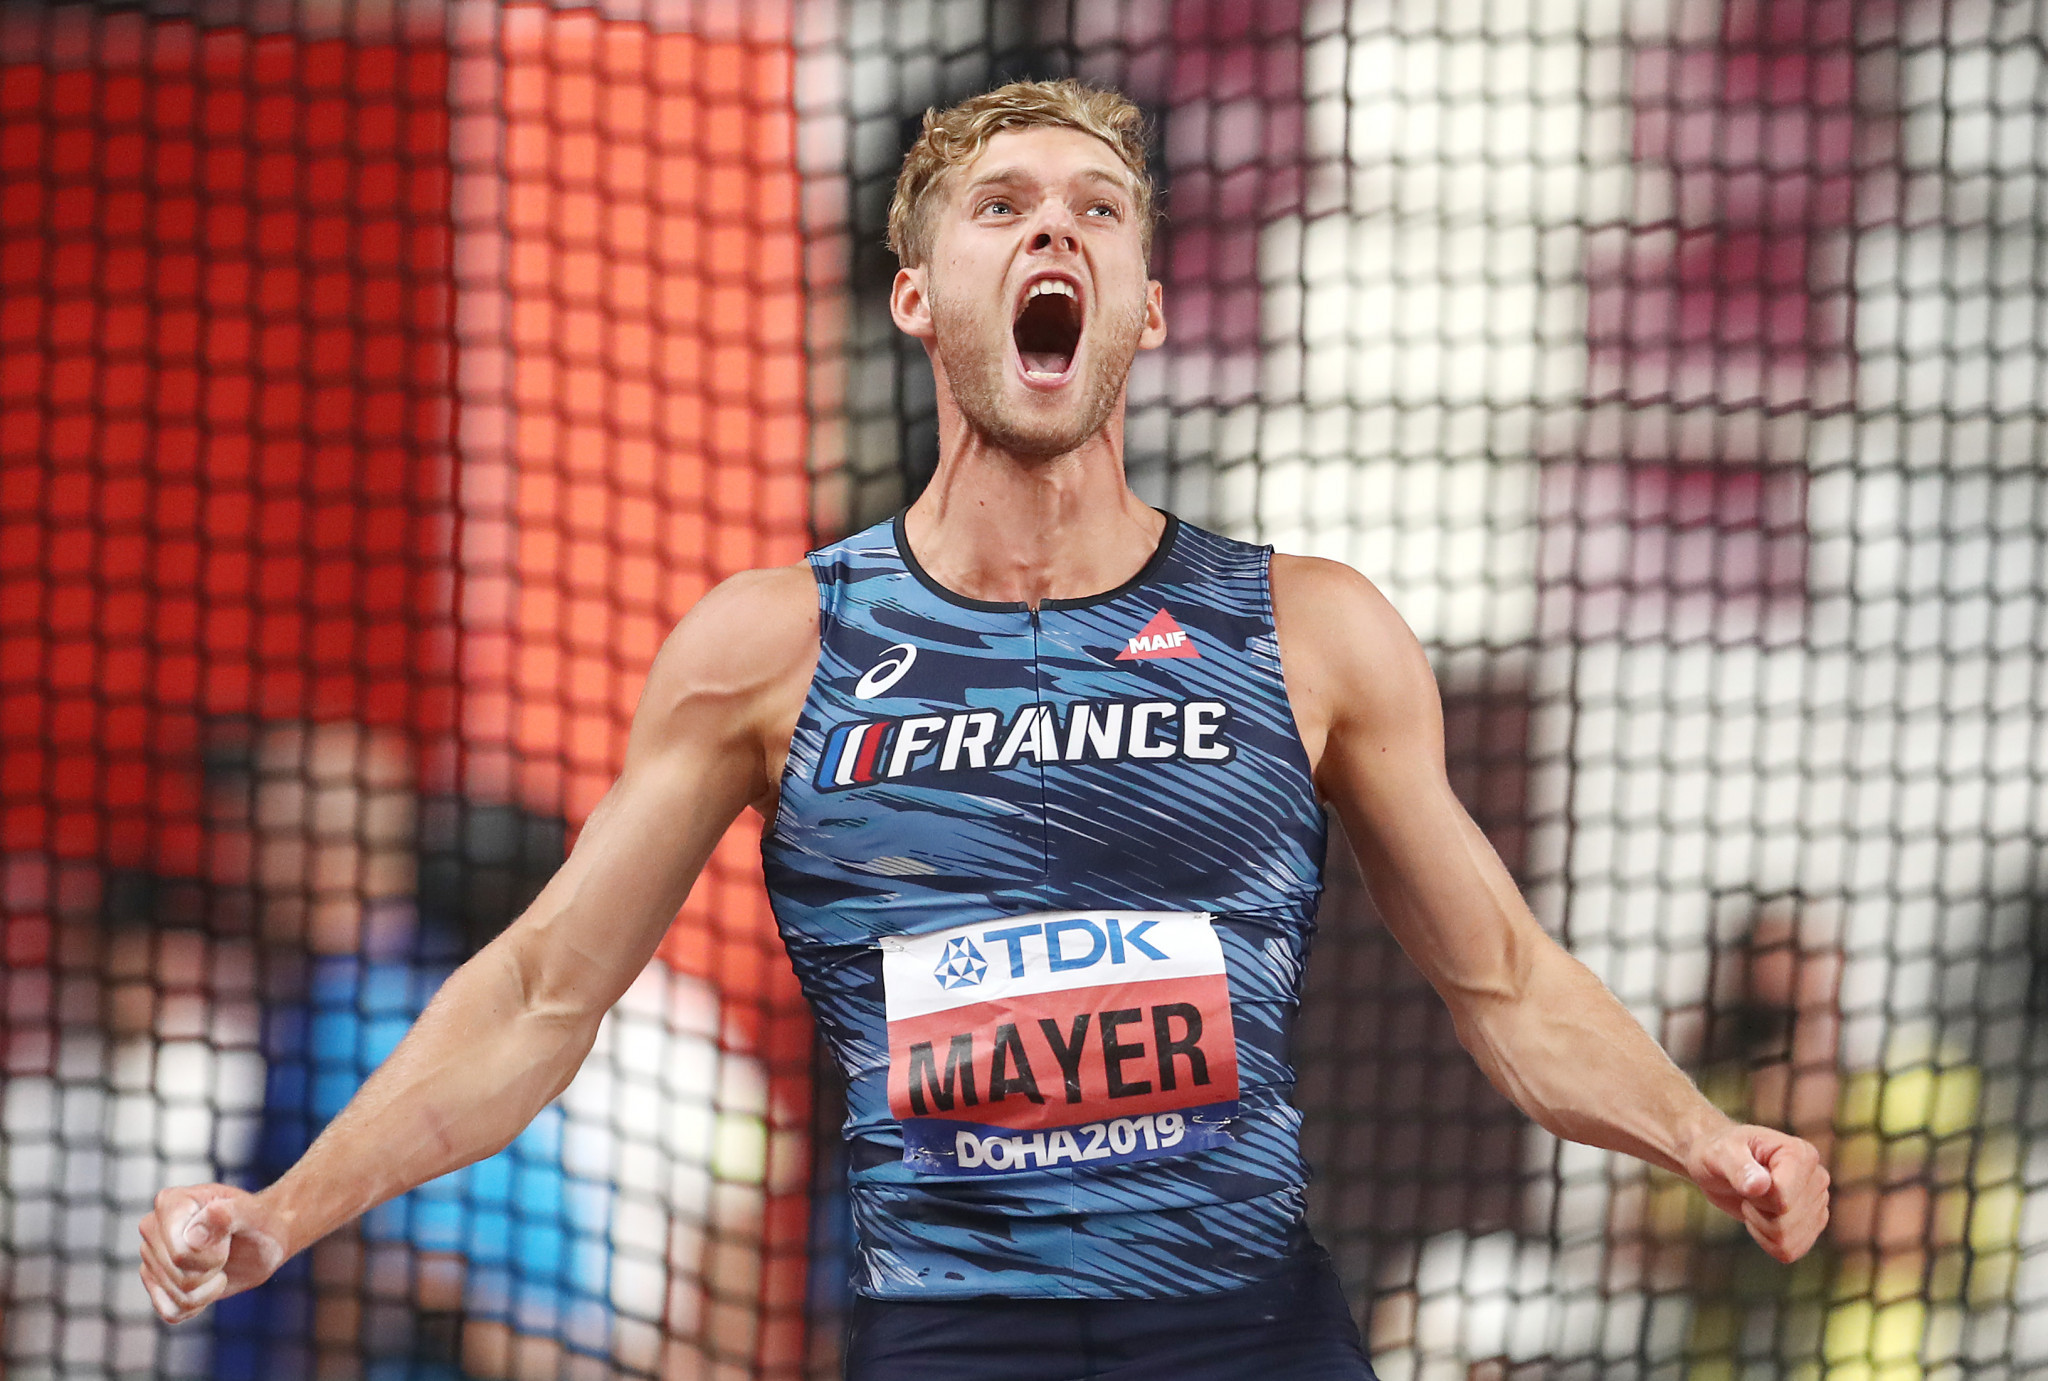 World decathlon record holder Kevin Mayer will need to score in excess of 8,350 to book his place at Tokyo 2020 ©Getty Images